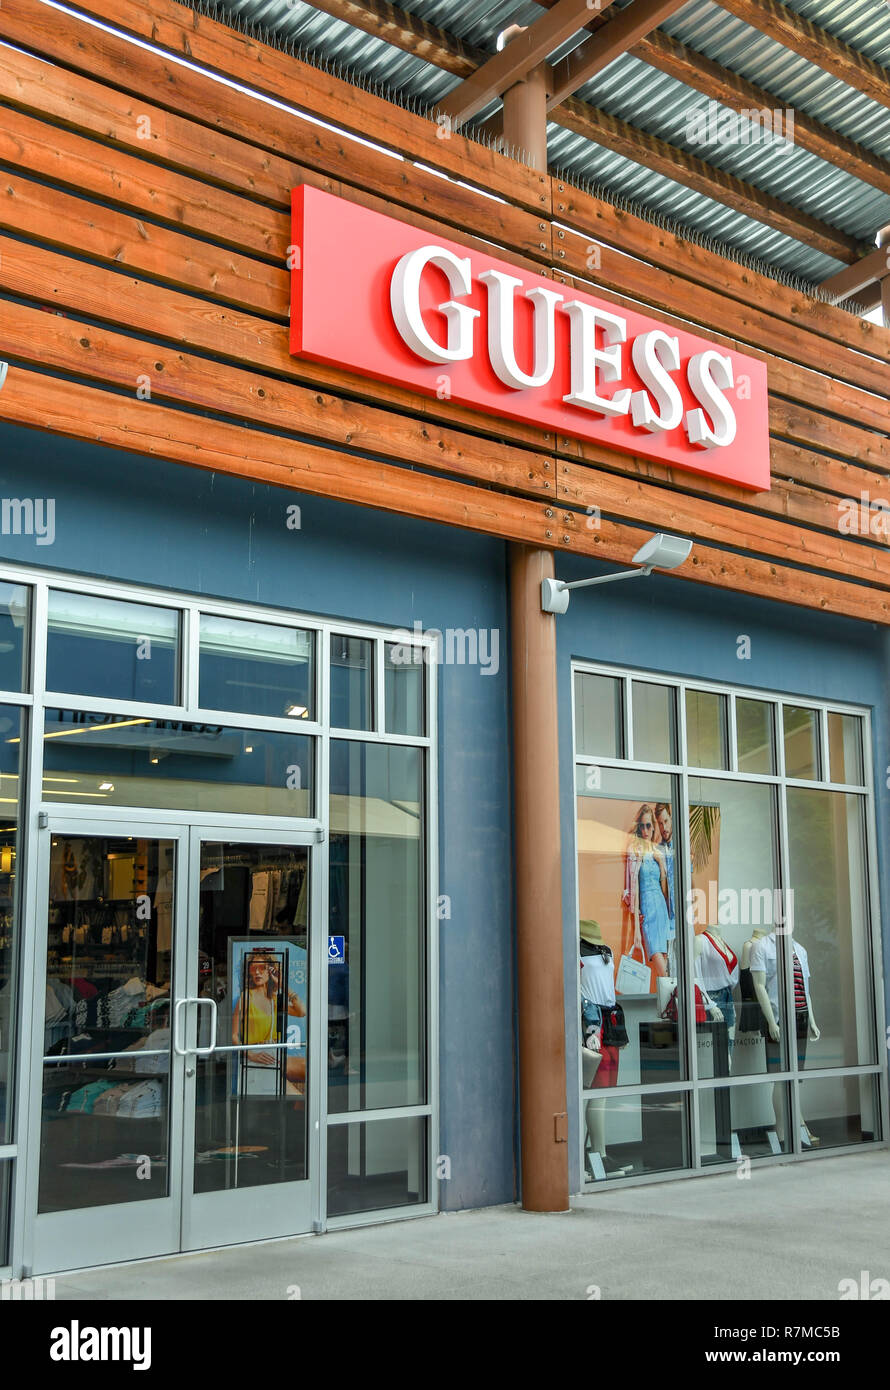 Guess Clothing Store High Resolution Stock Photography and Images - Alamy